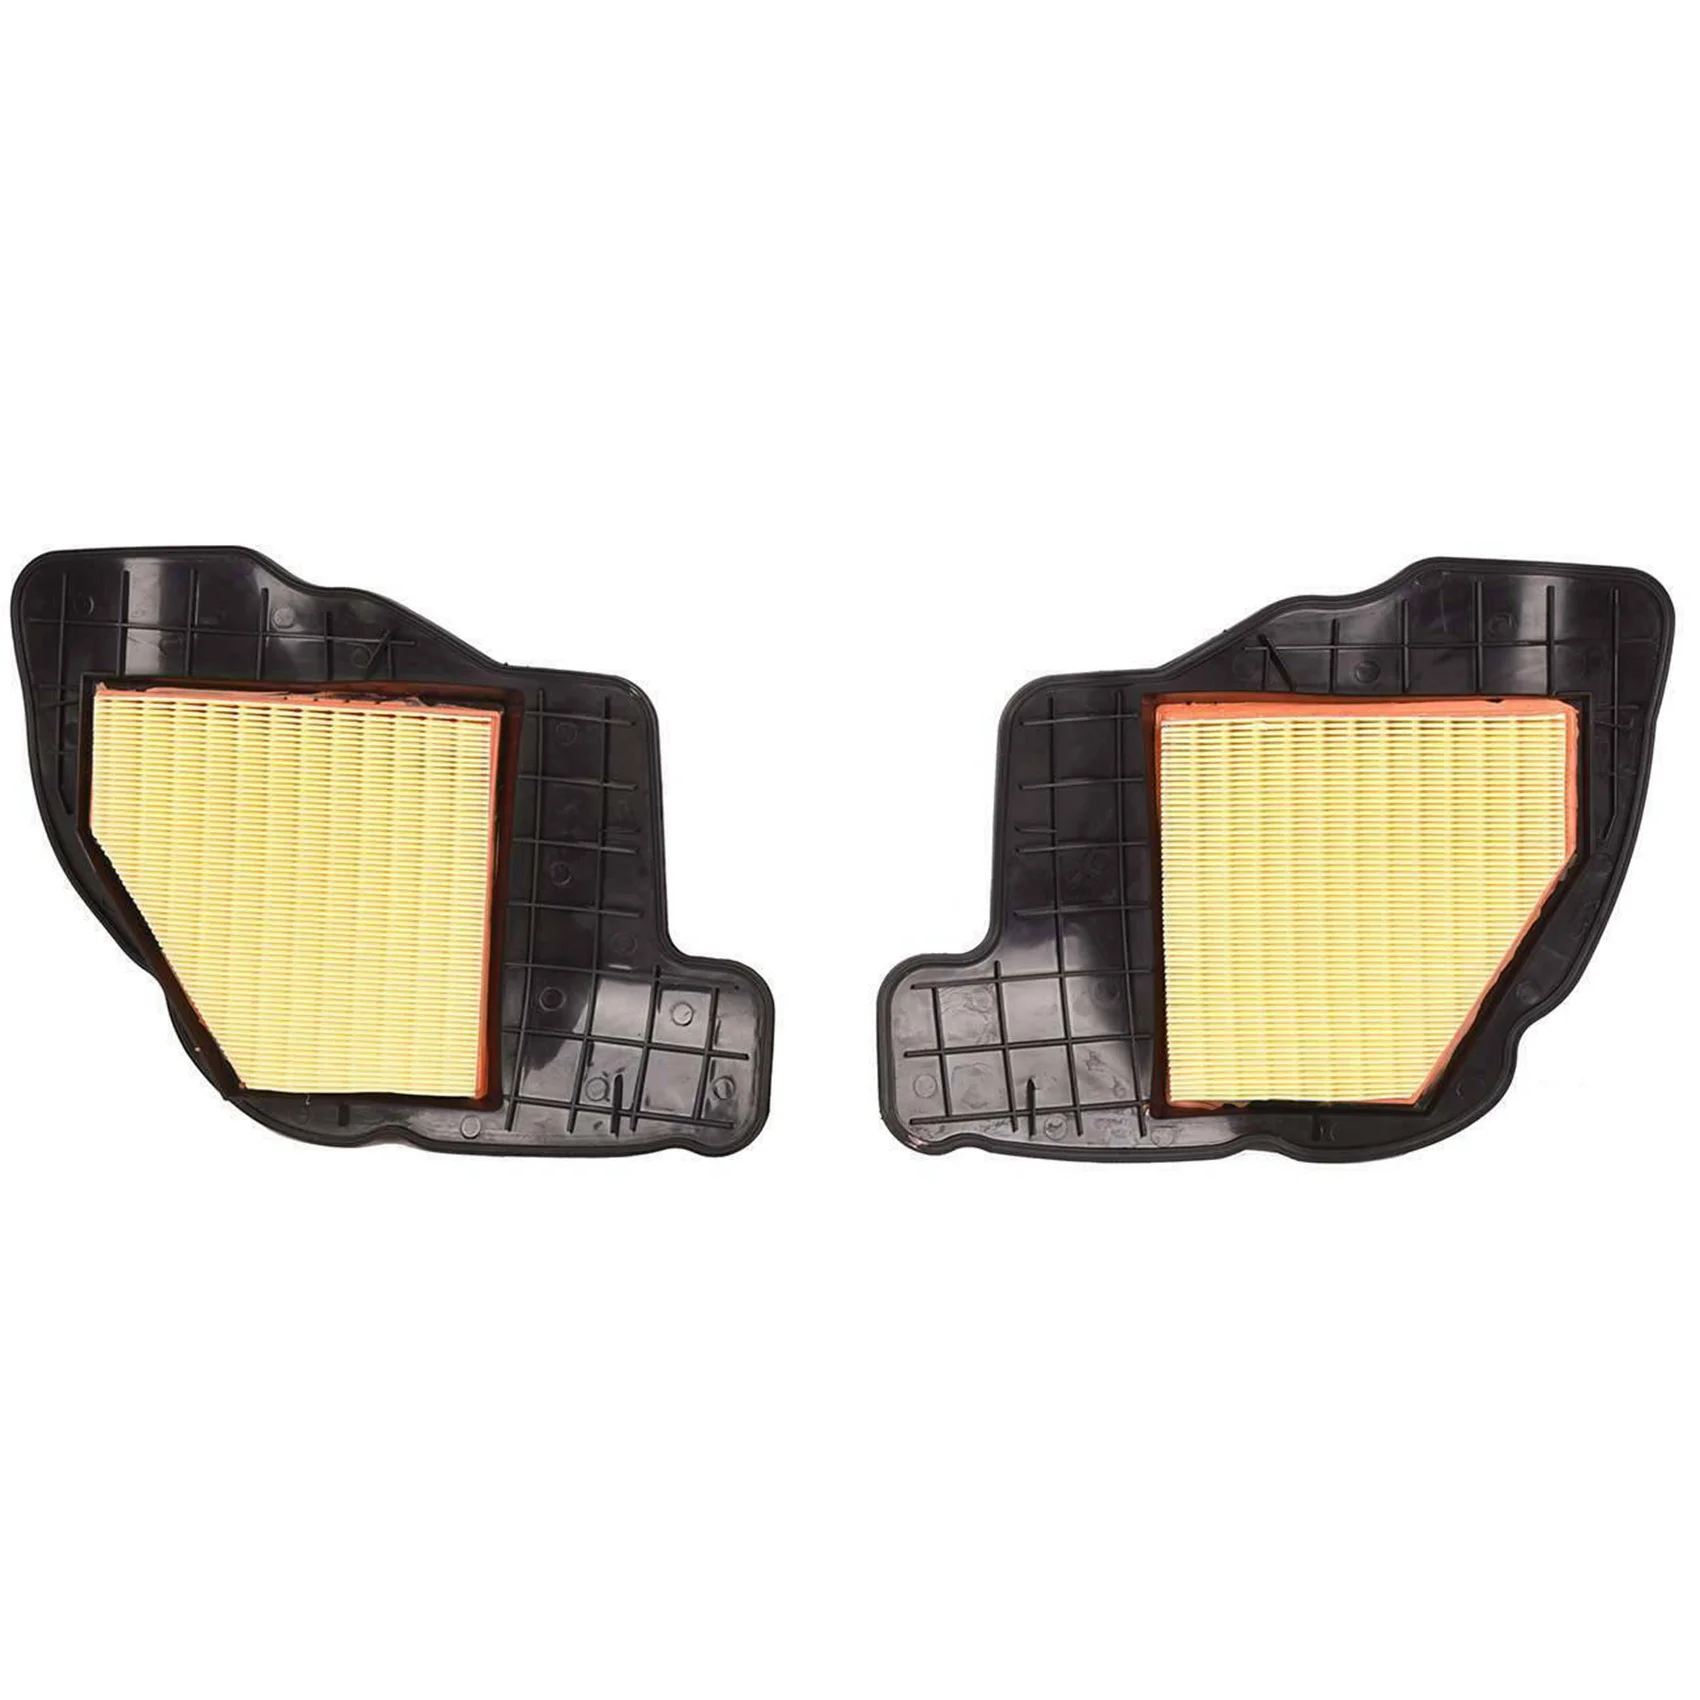 

Right and Left Air Filter Elements 13717577457/13717577458 for 550I,650I,750Li,X5,X6 2008-2016 Car